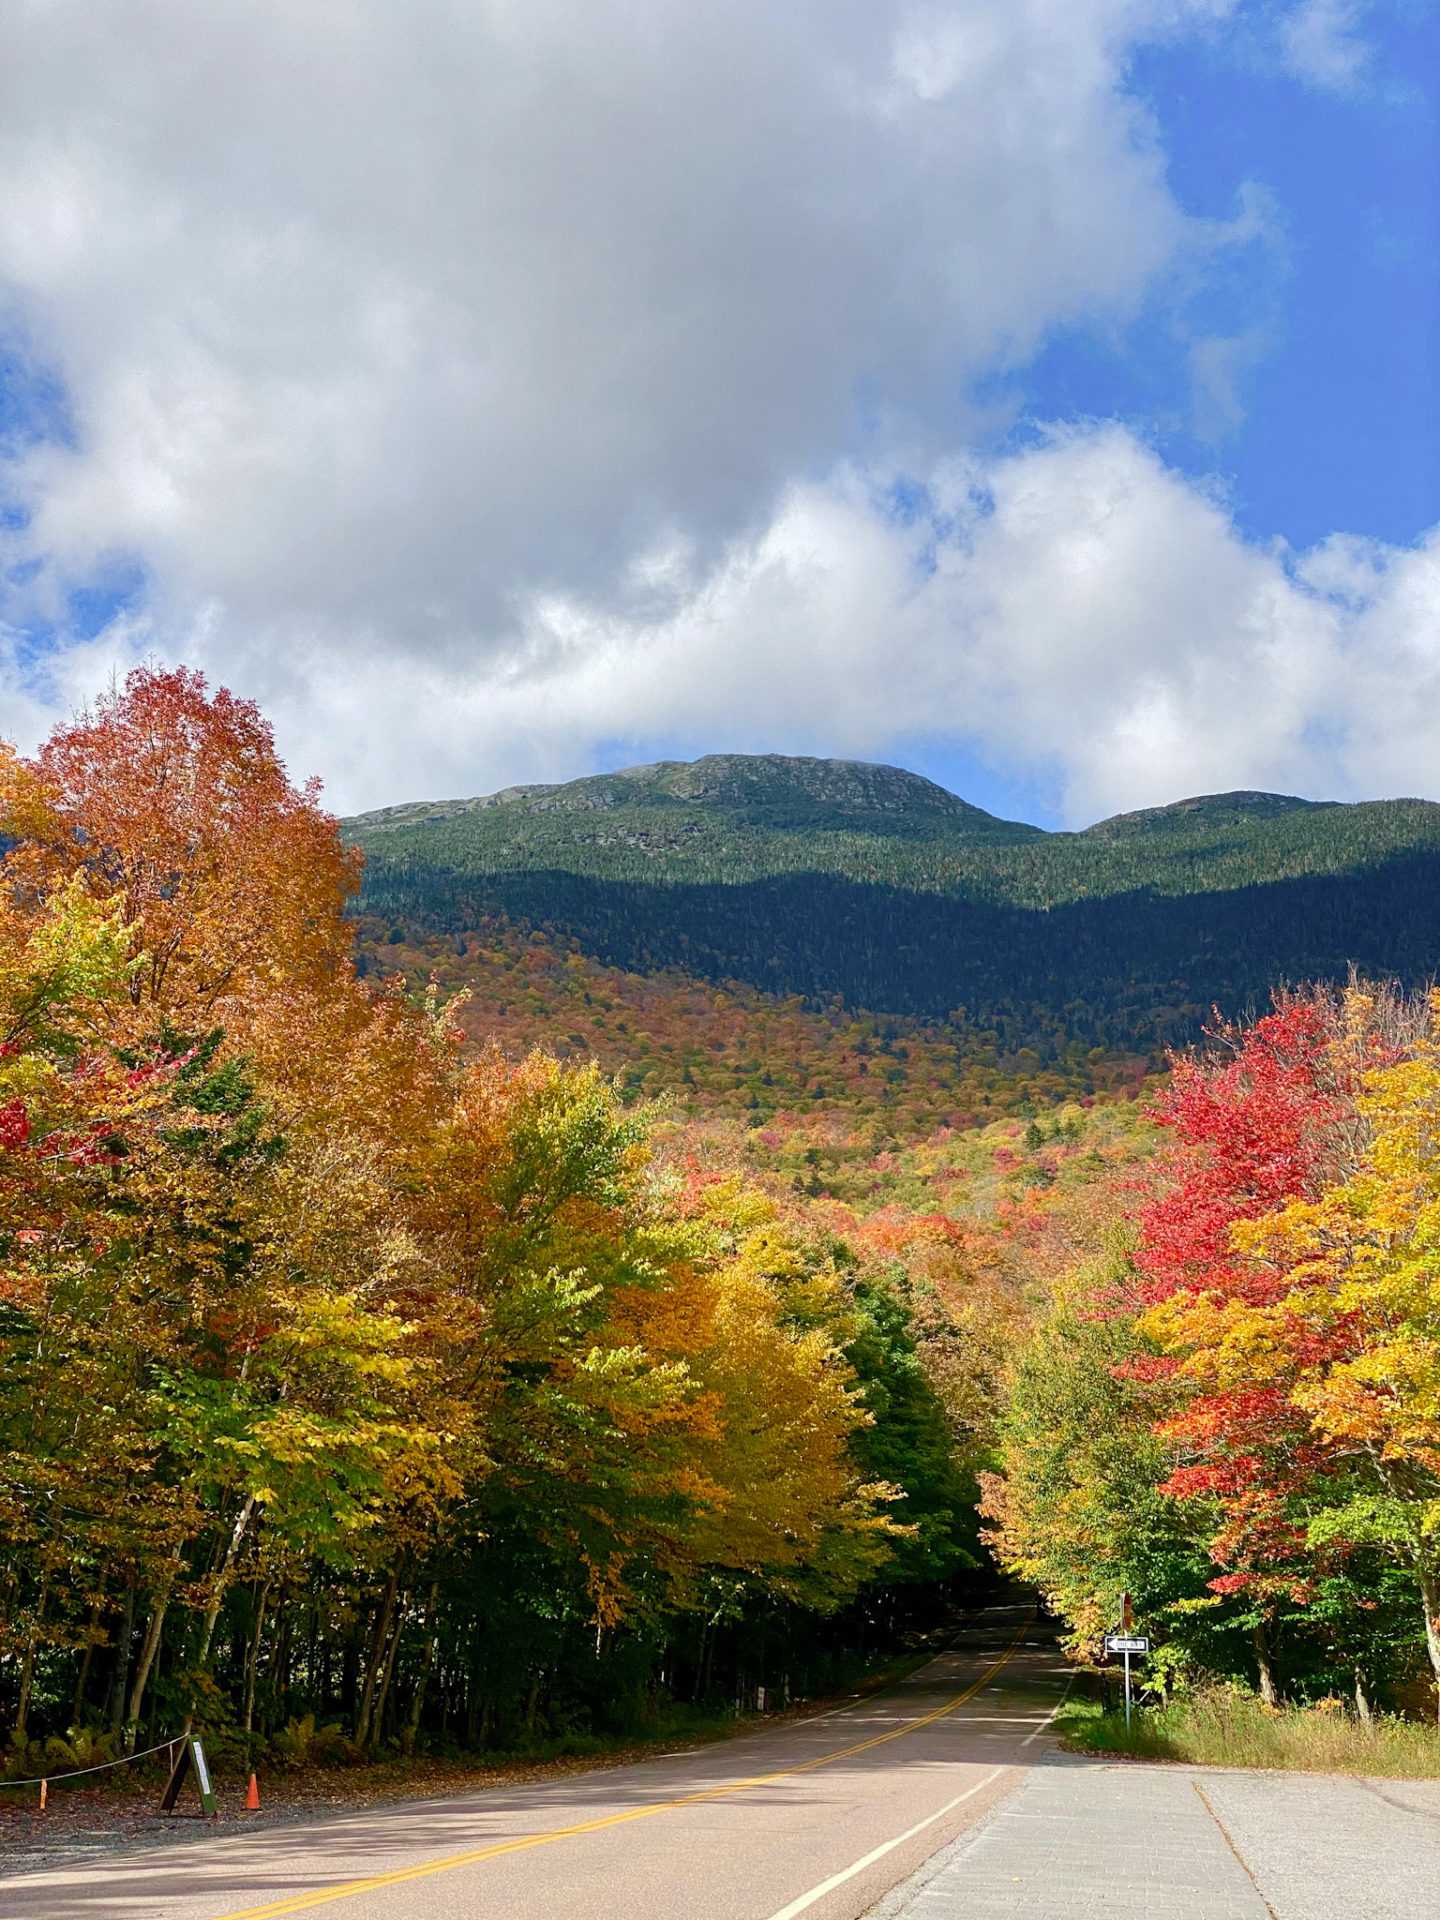 Fall foliage in Stowe, VT